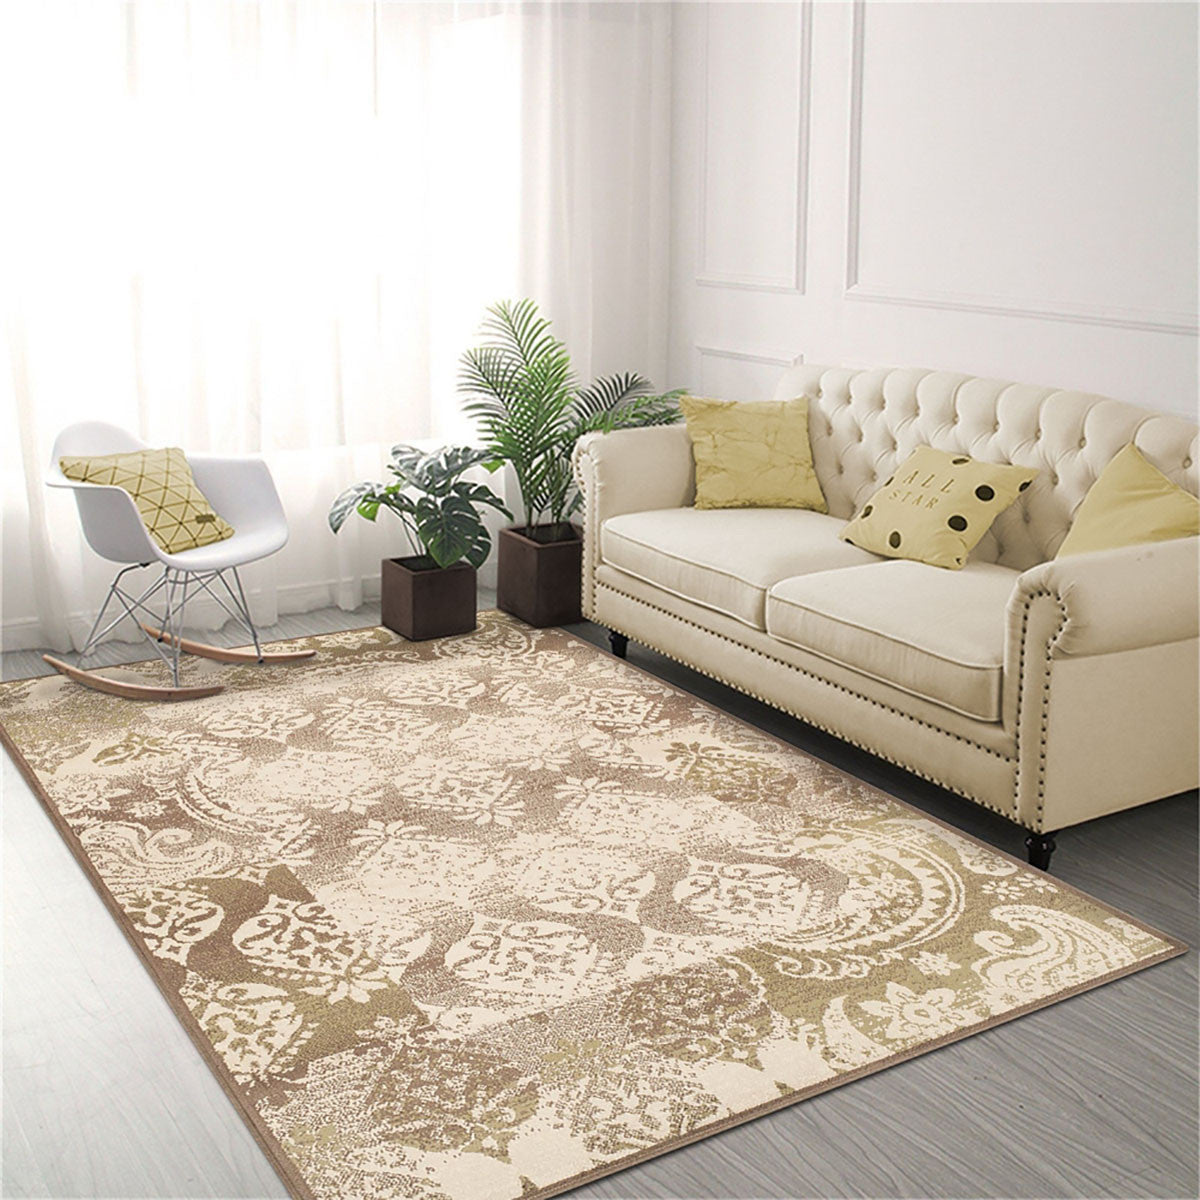 8' X 10' Brown Damask Power Loom Distressed Stain Resistant Area Rug